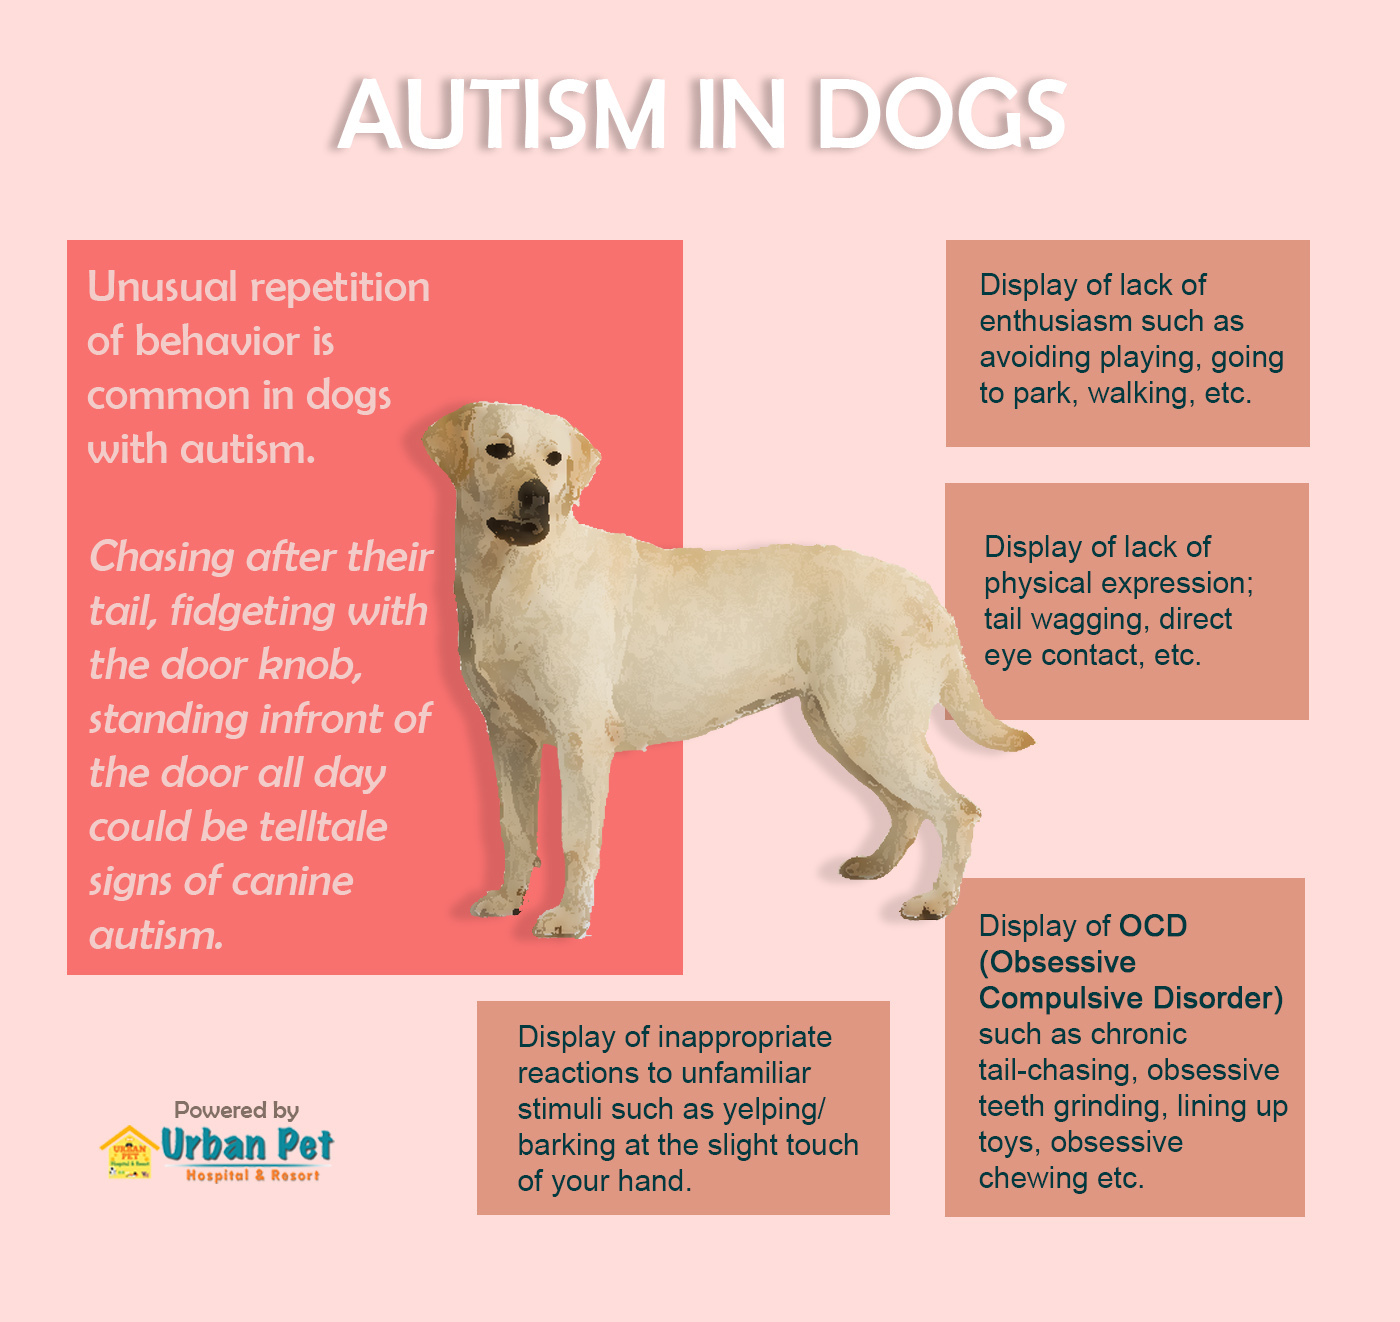 is there such a thing as autism in dogs